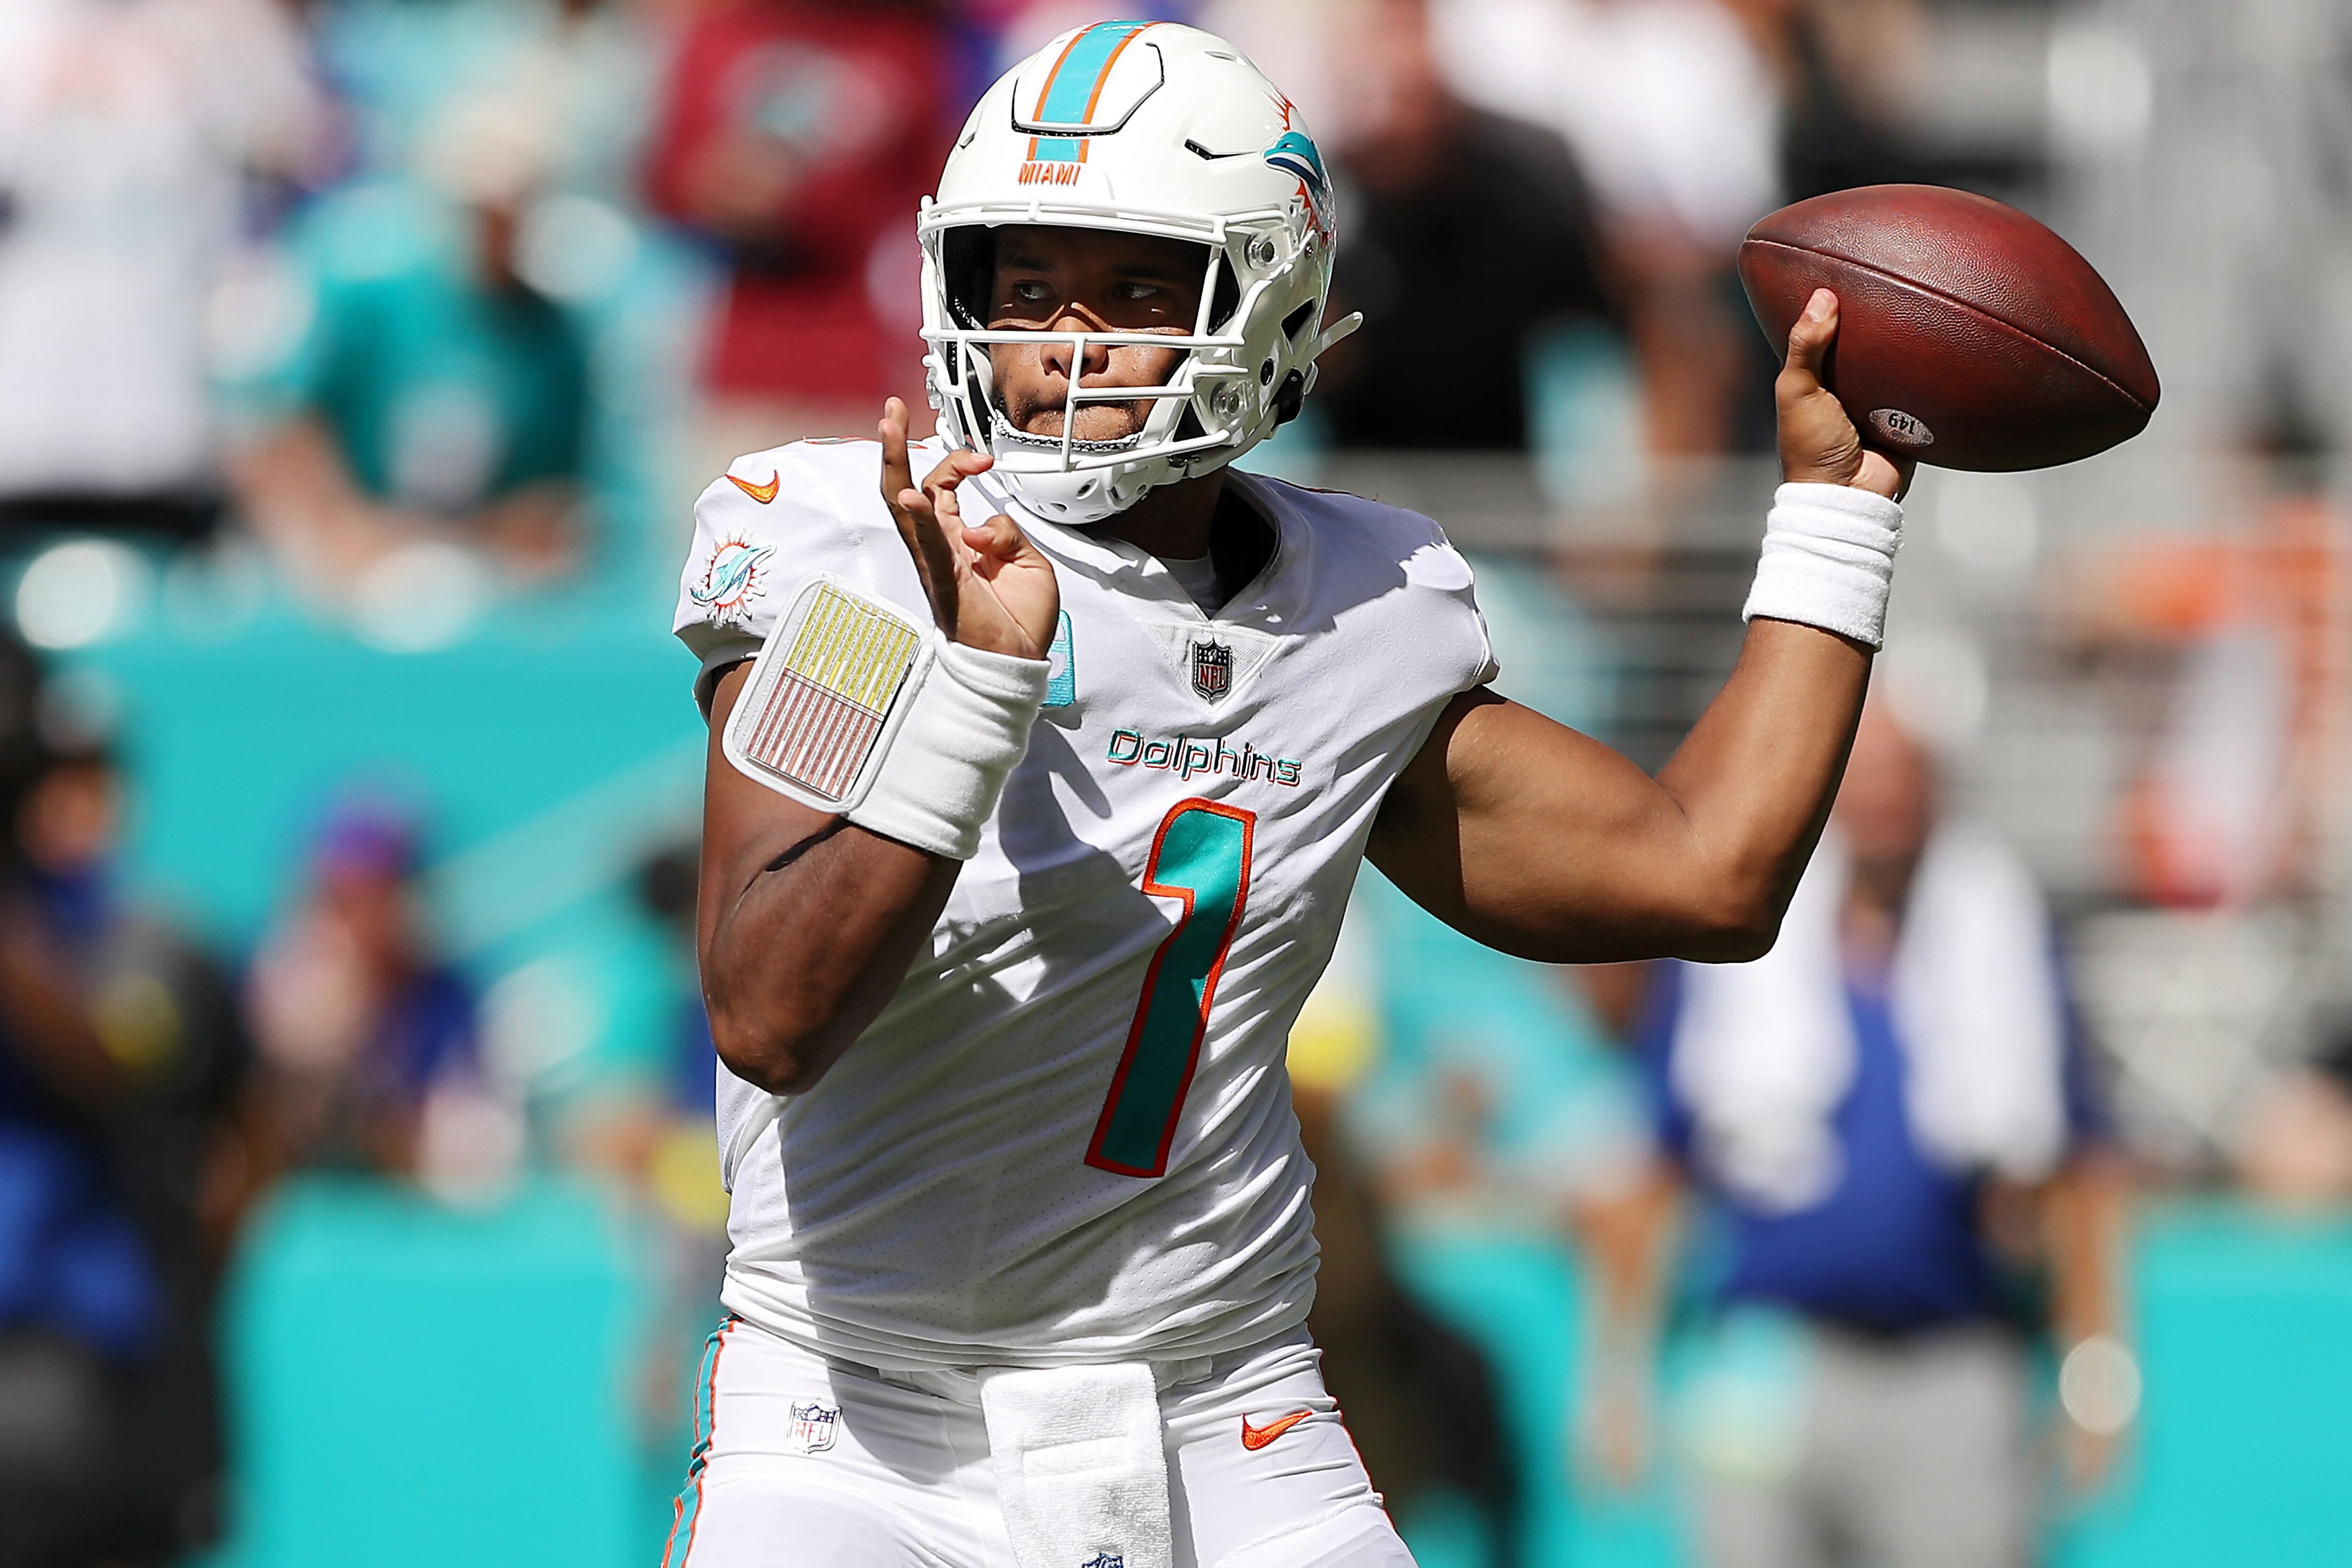 Steelers vs. Dolphins odds, prediction: Is Miami overpriced on